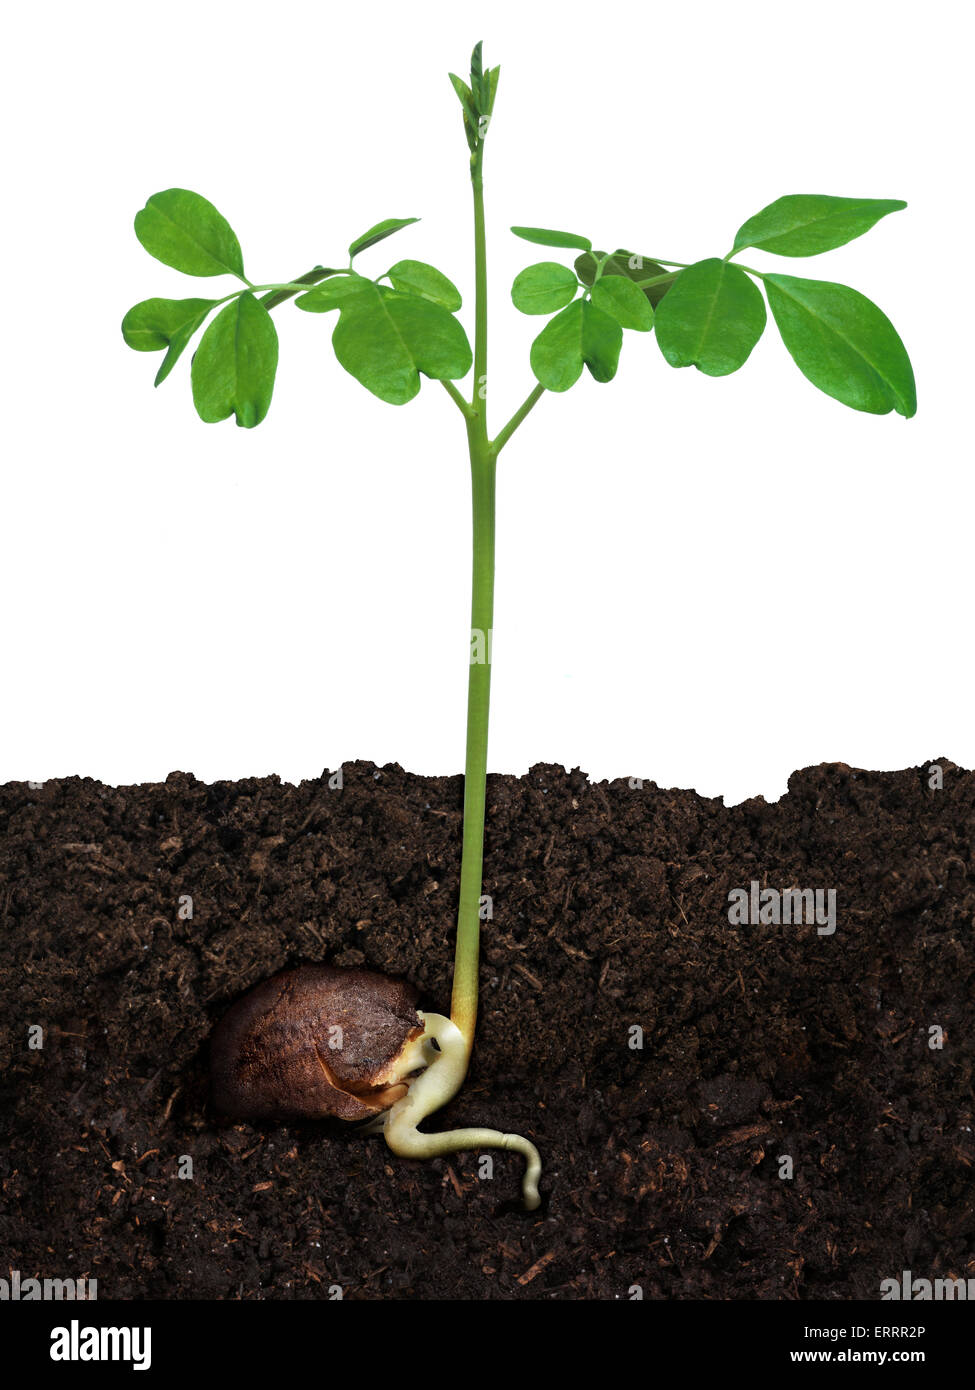 Moringa Oleifera plant growing from a seed in soil isolated on white background Stock Photo